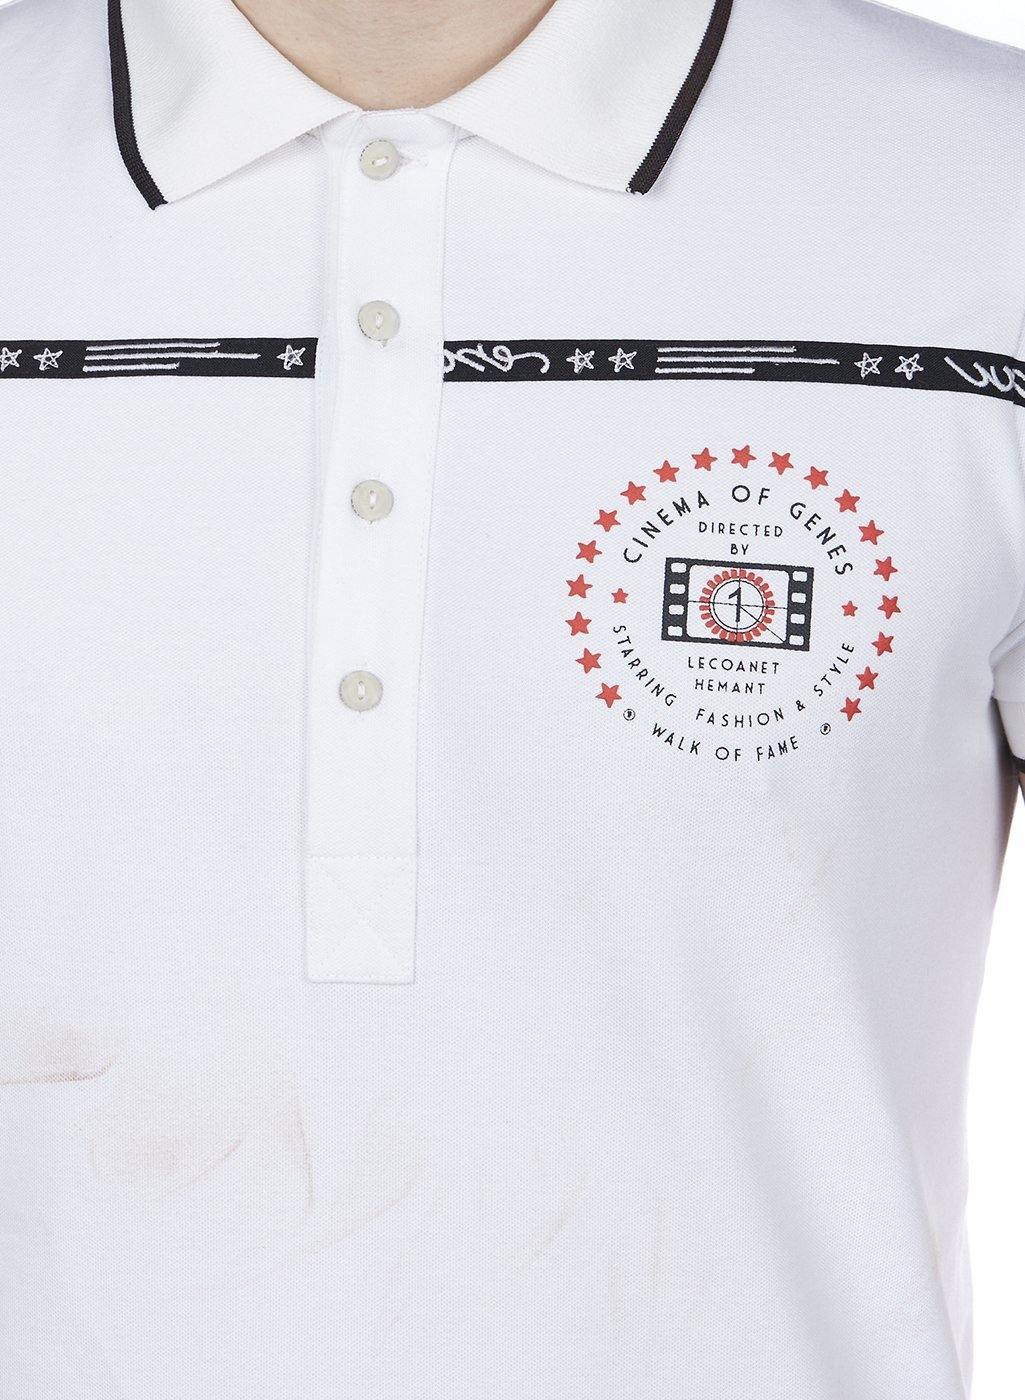 AUDITION POLO - Genes online store 2020